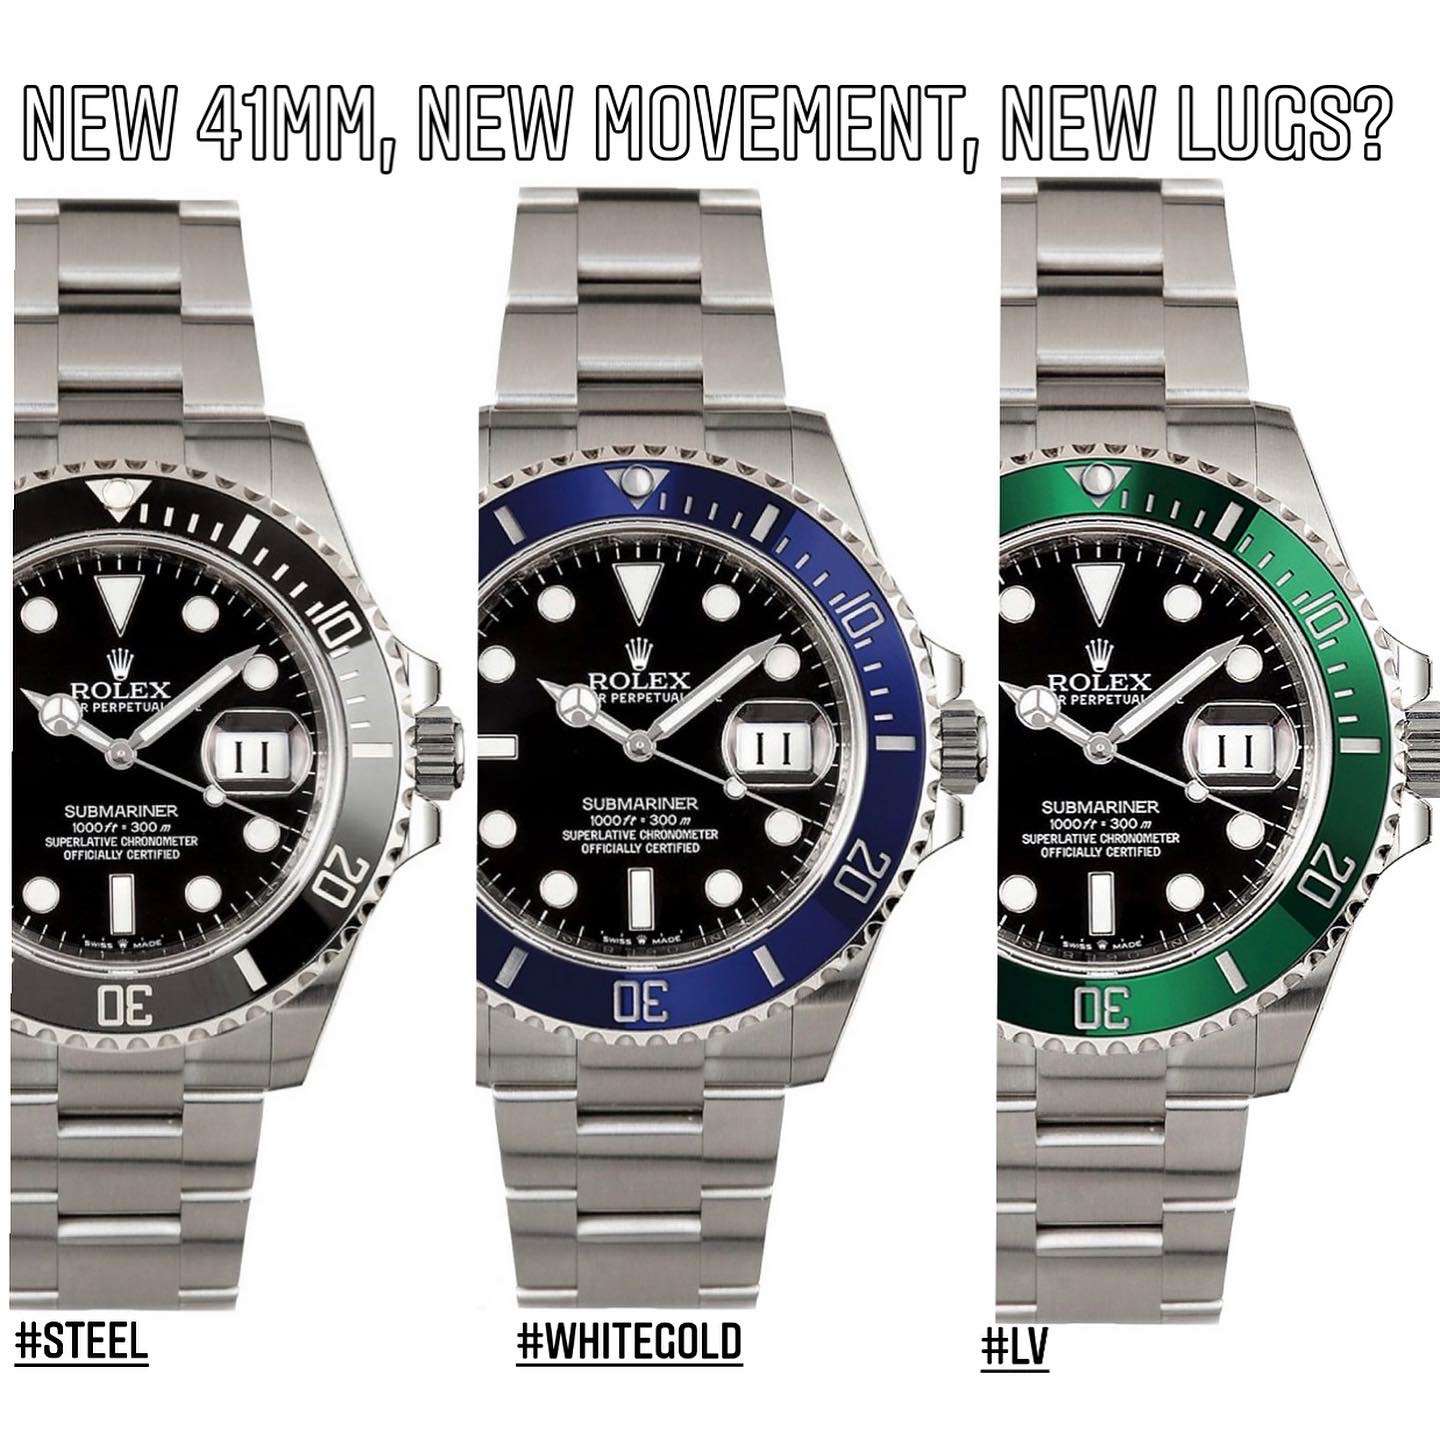 My Rolex 2020 Predictions - News is out 